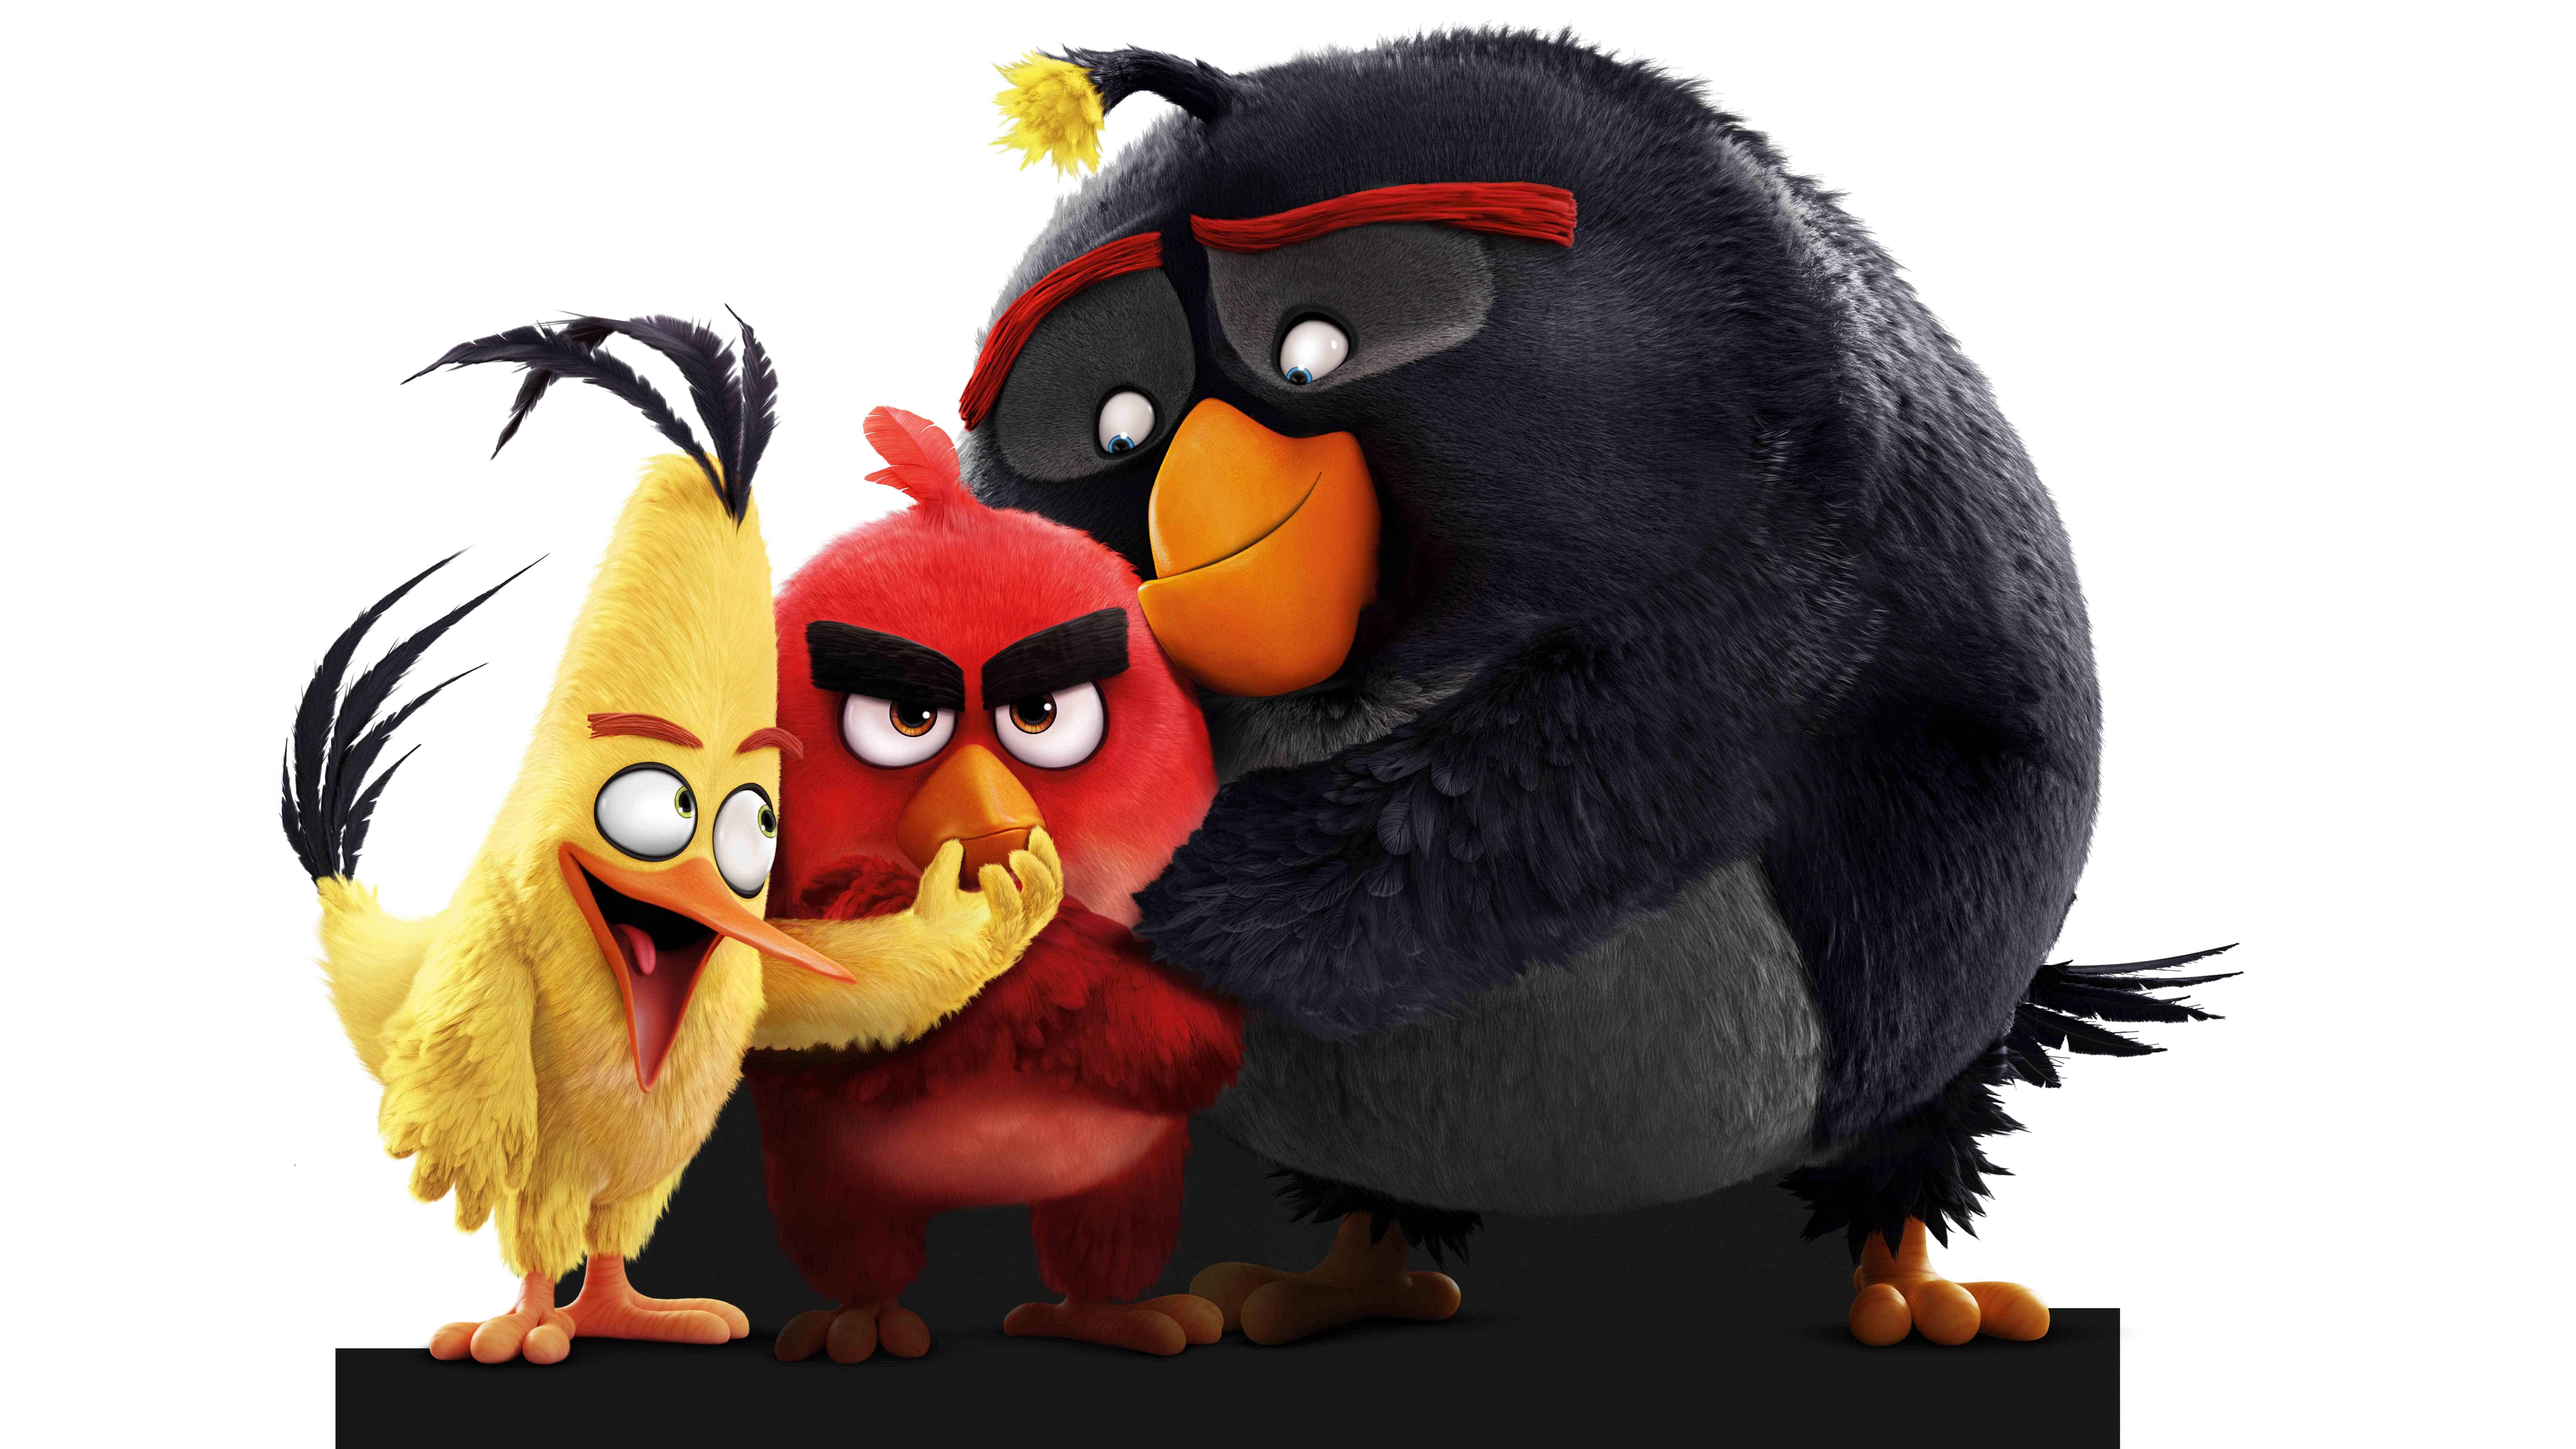 3840x2160 / 3840x2160 angry birds 4k desktop high resolution wallpapers -  Coolwallpapers.me!